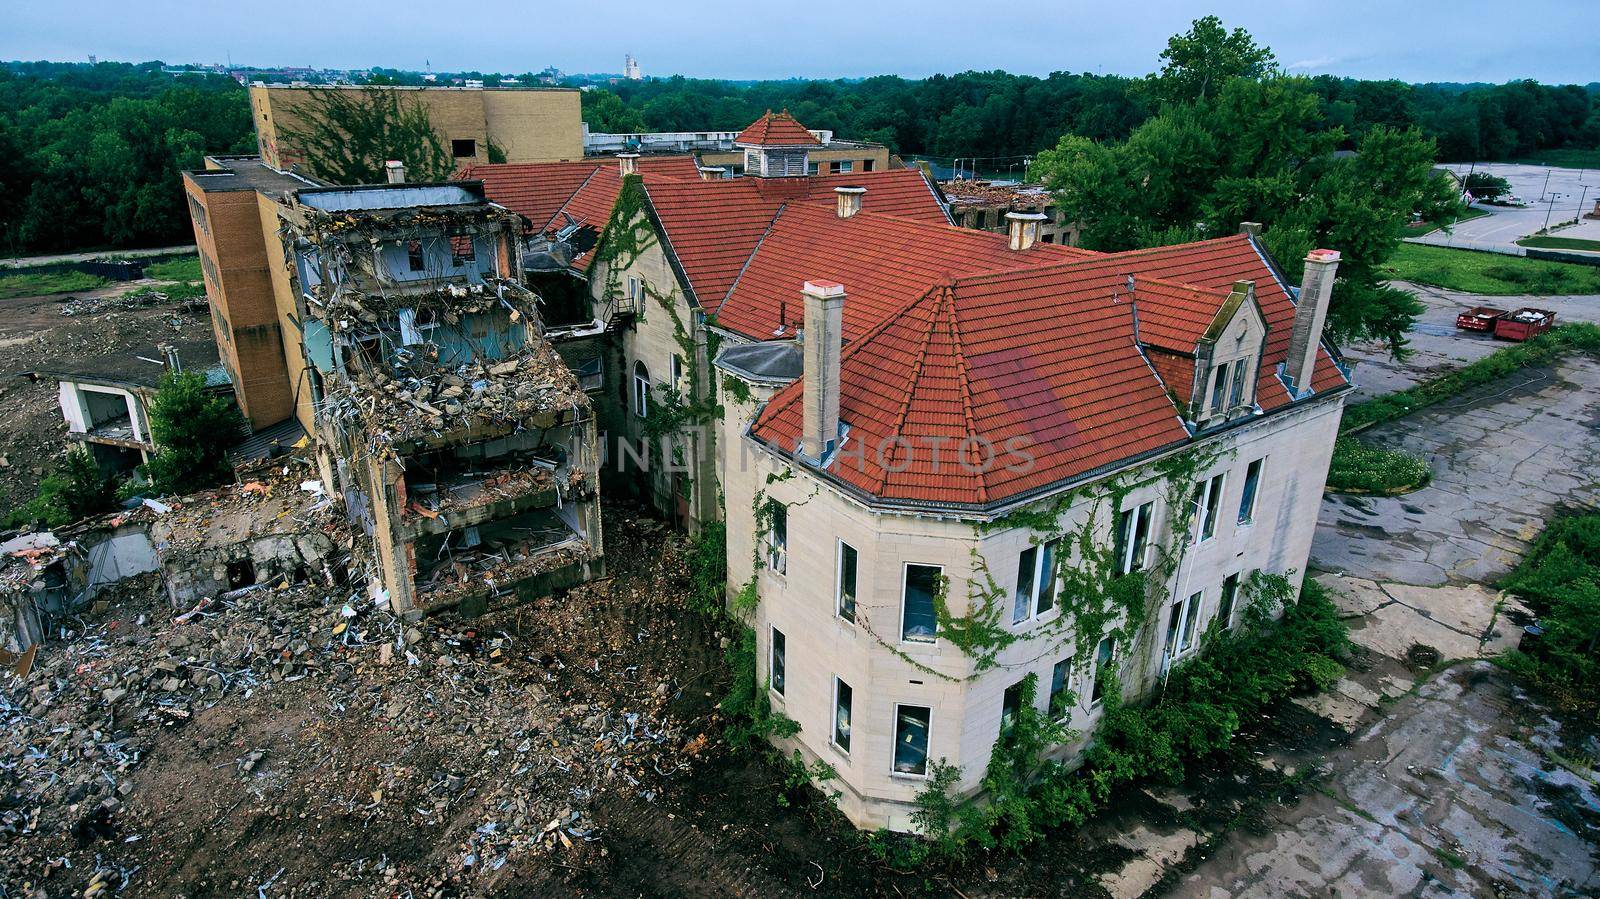 Image of Aerial of large abandoned hospital completely falling apart